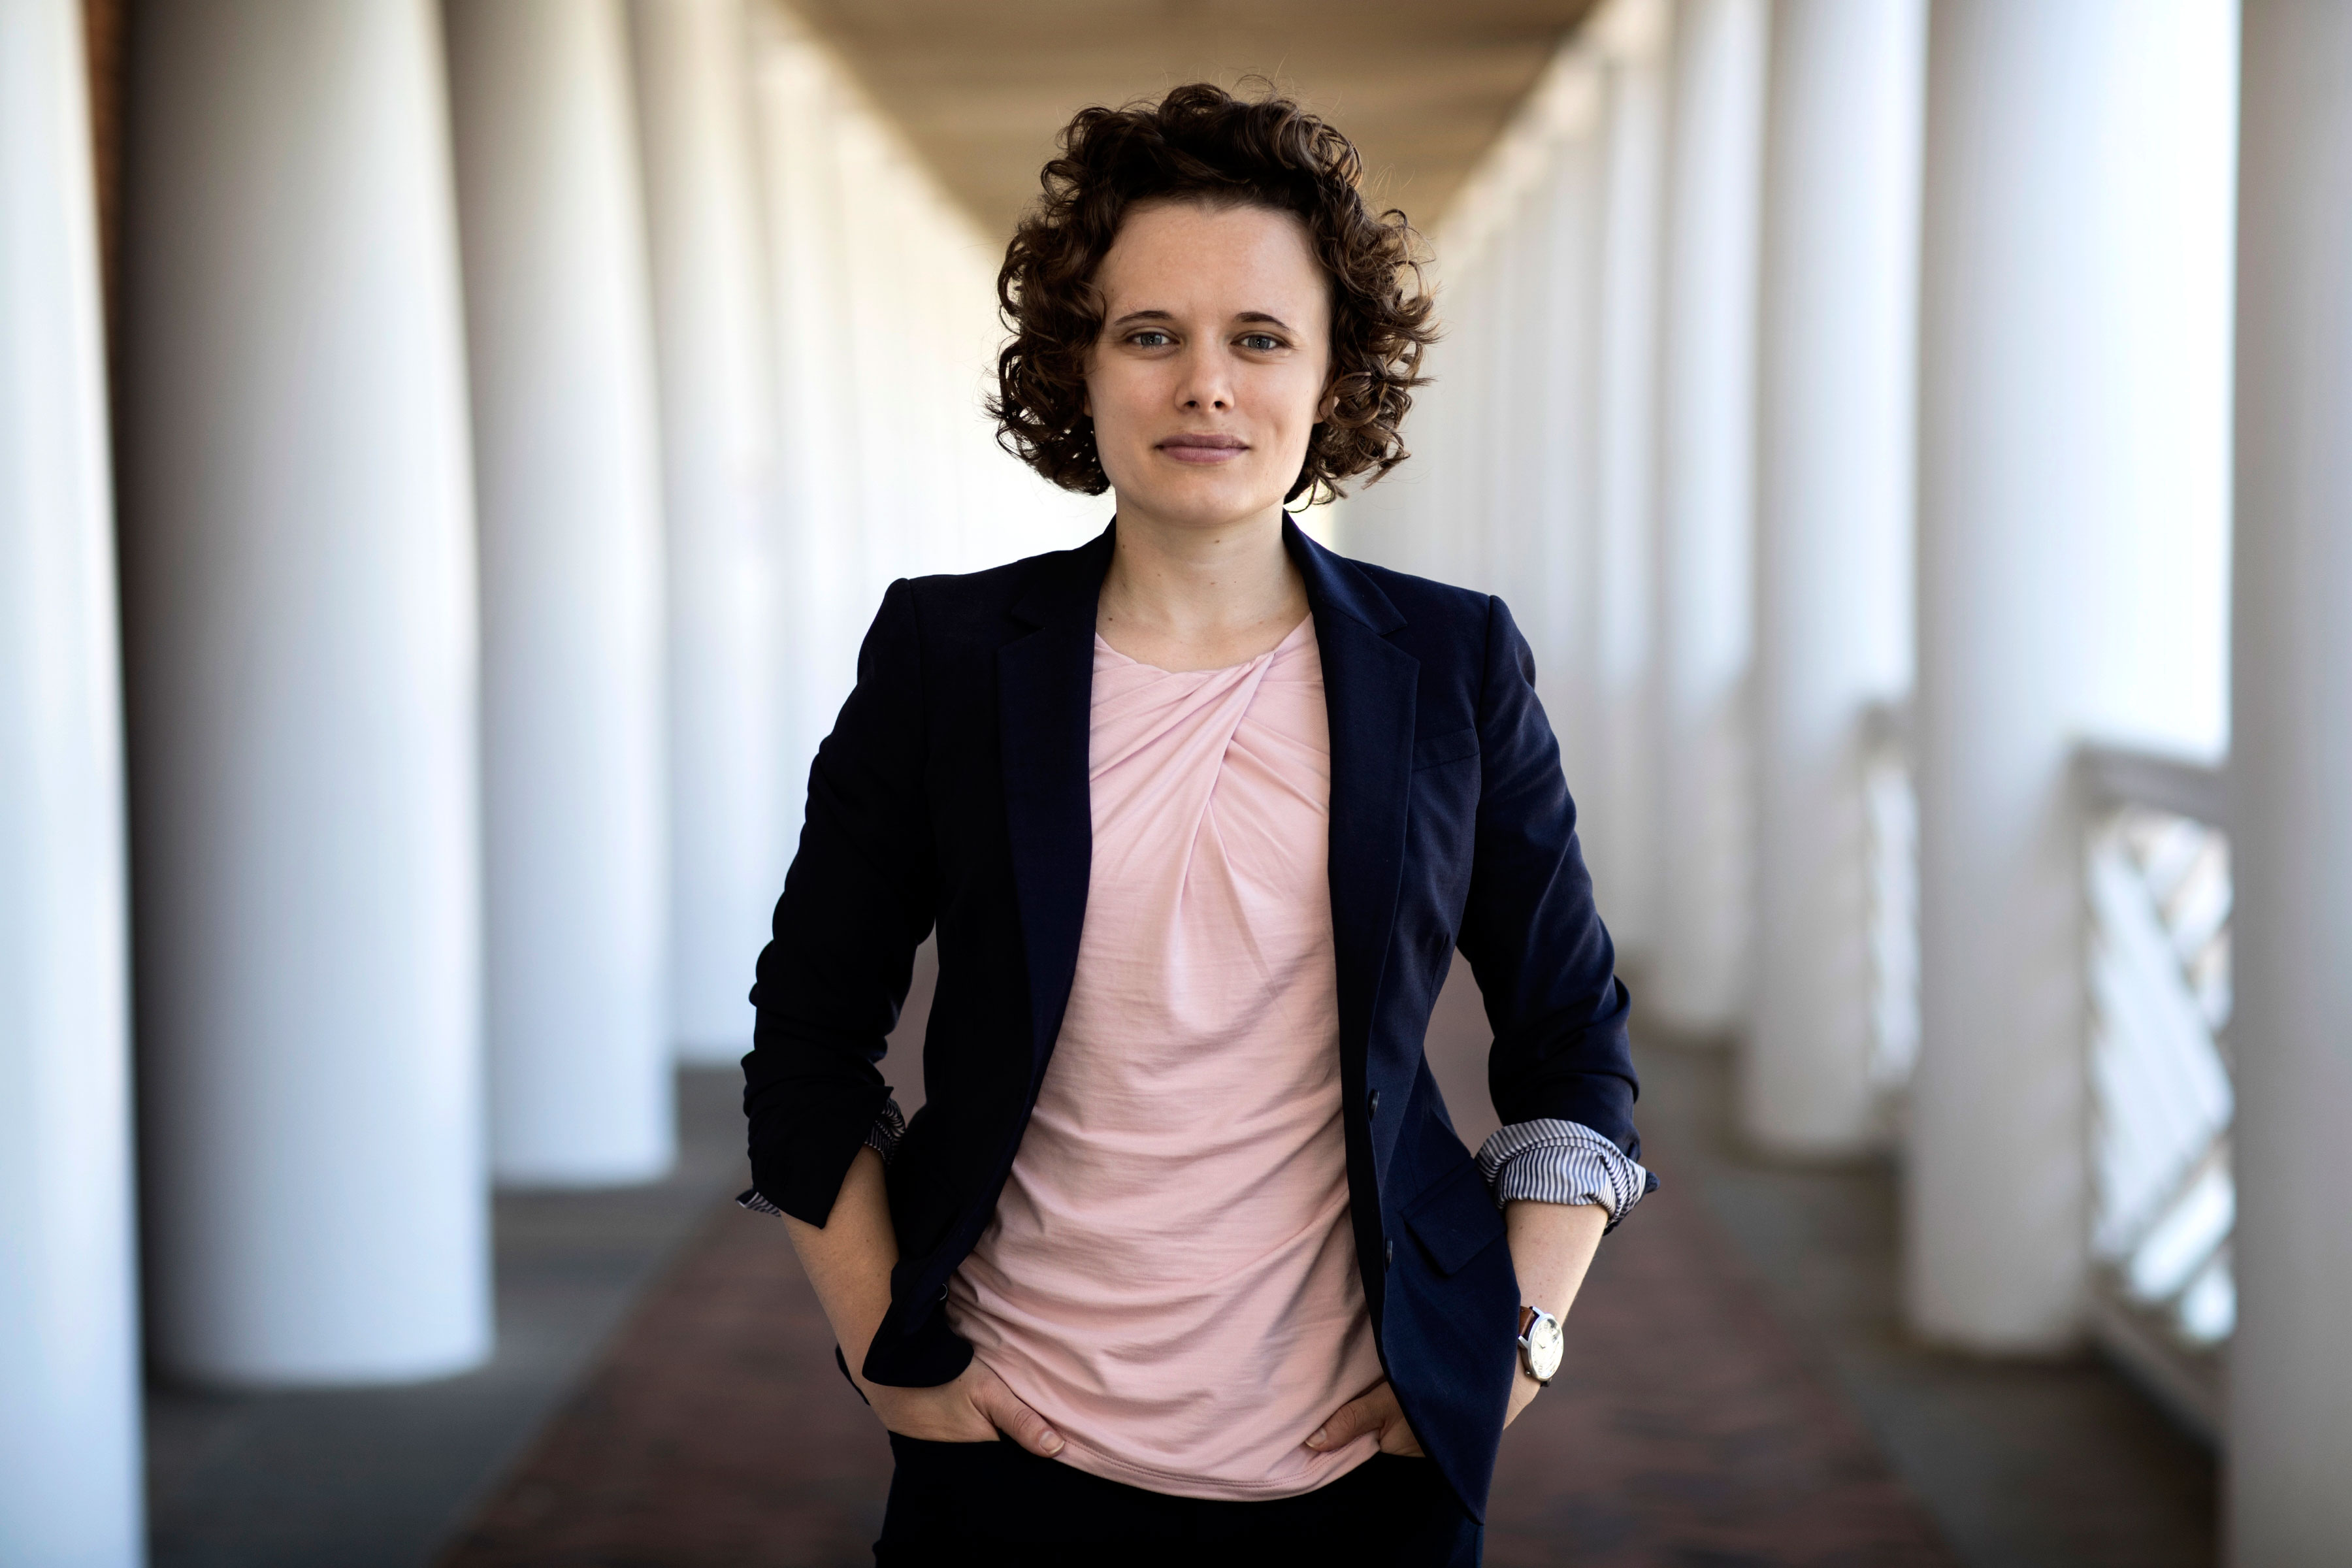 Sally Hudson is a new assistant professor of public policy, education and economics jointly appointed in the Frank Batten School of Leadership and Public Policy and the Curry School of Education.